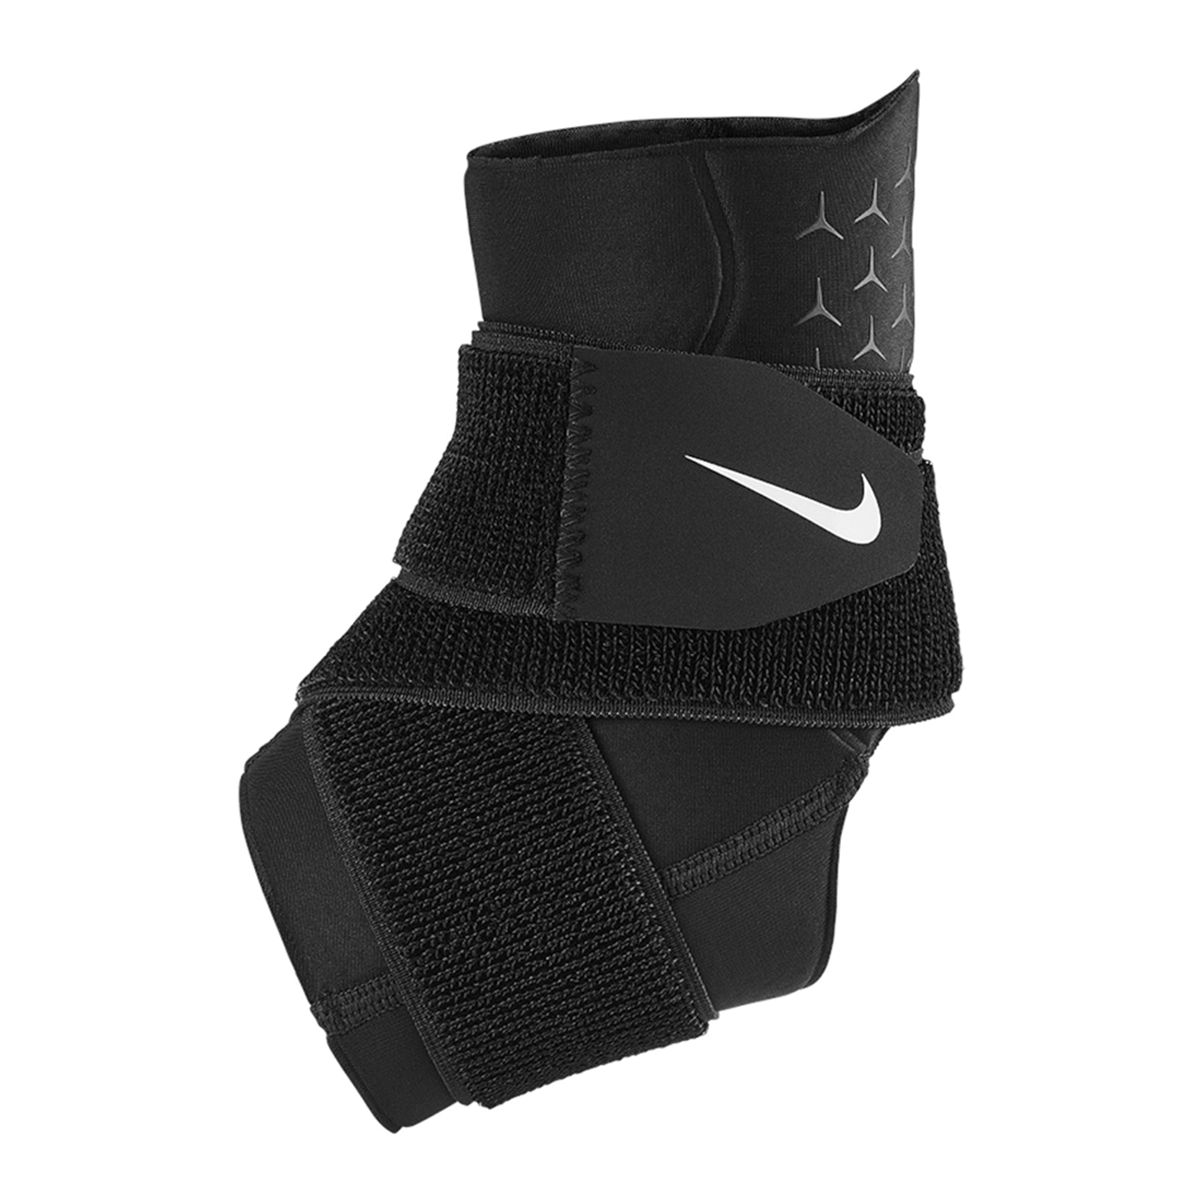 NIKE PRO ANKLE SLEEVE WITH STRAP BLACK/W Ankle imagine 2022